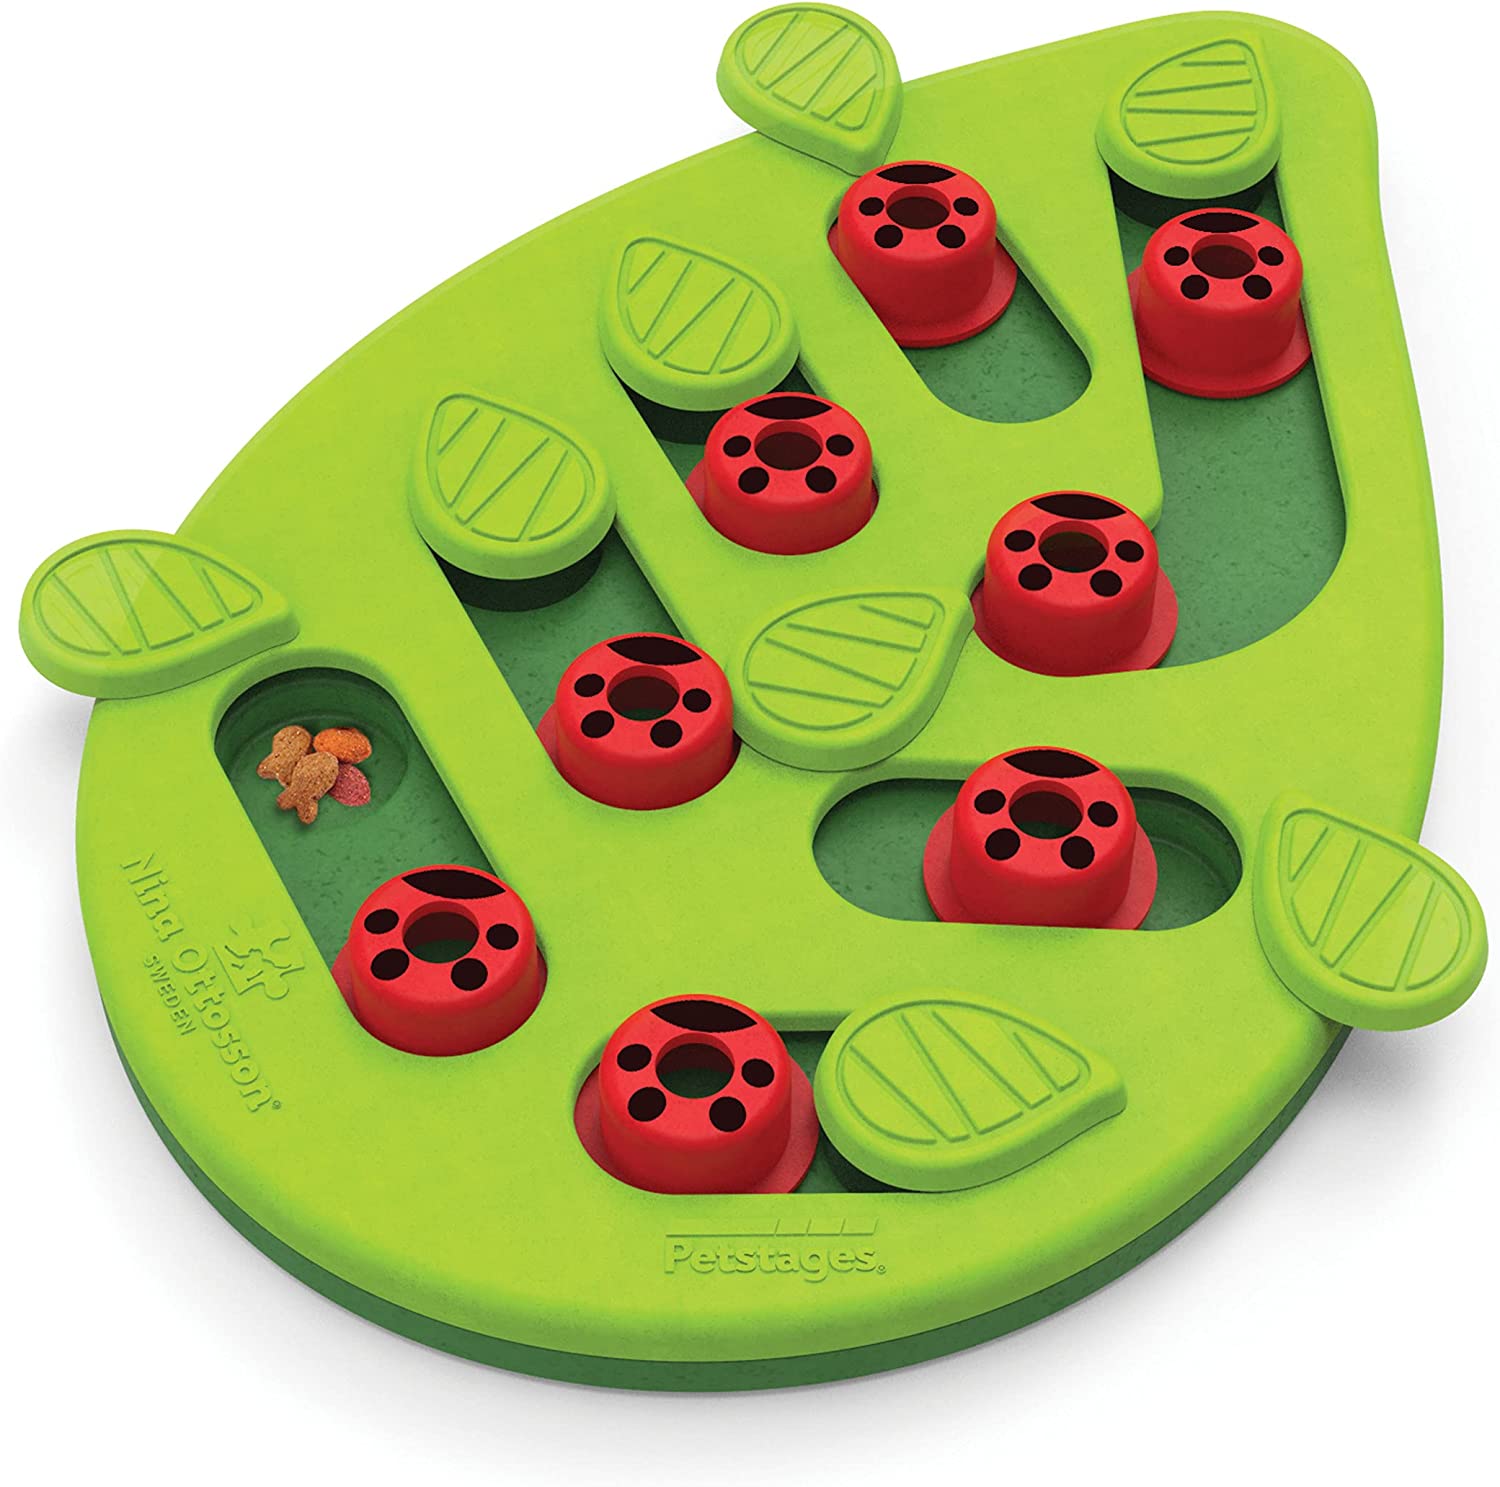 Petstages Nina Ottosson Buggin' Out Puzzle & Play